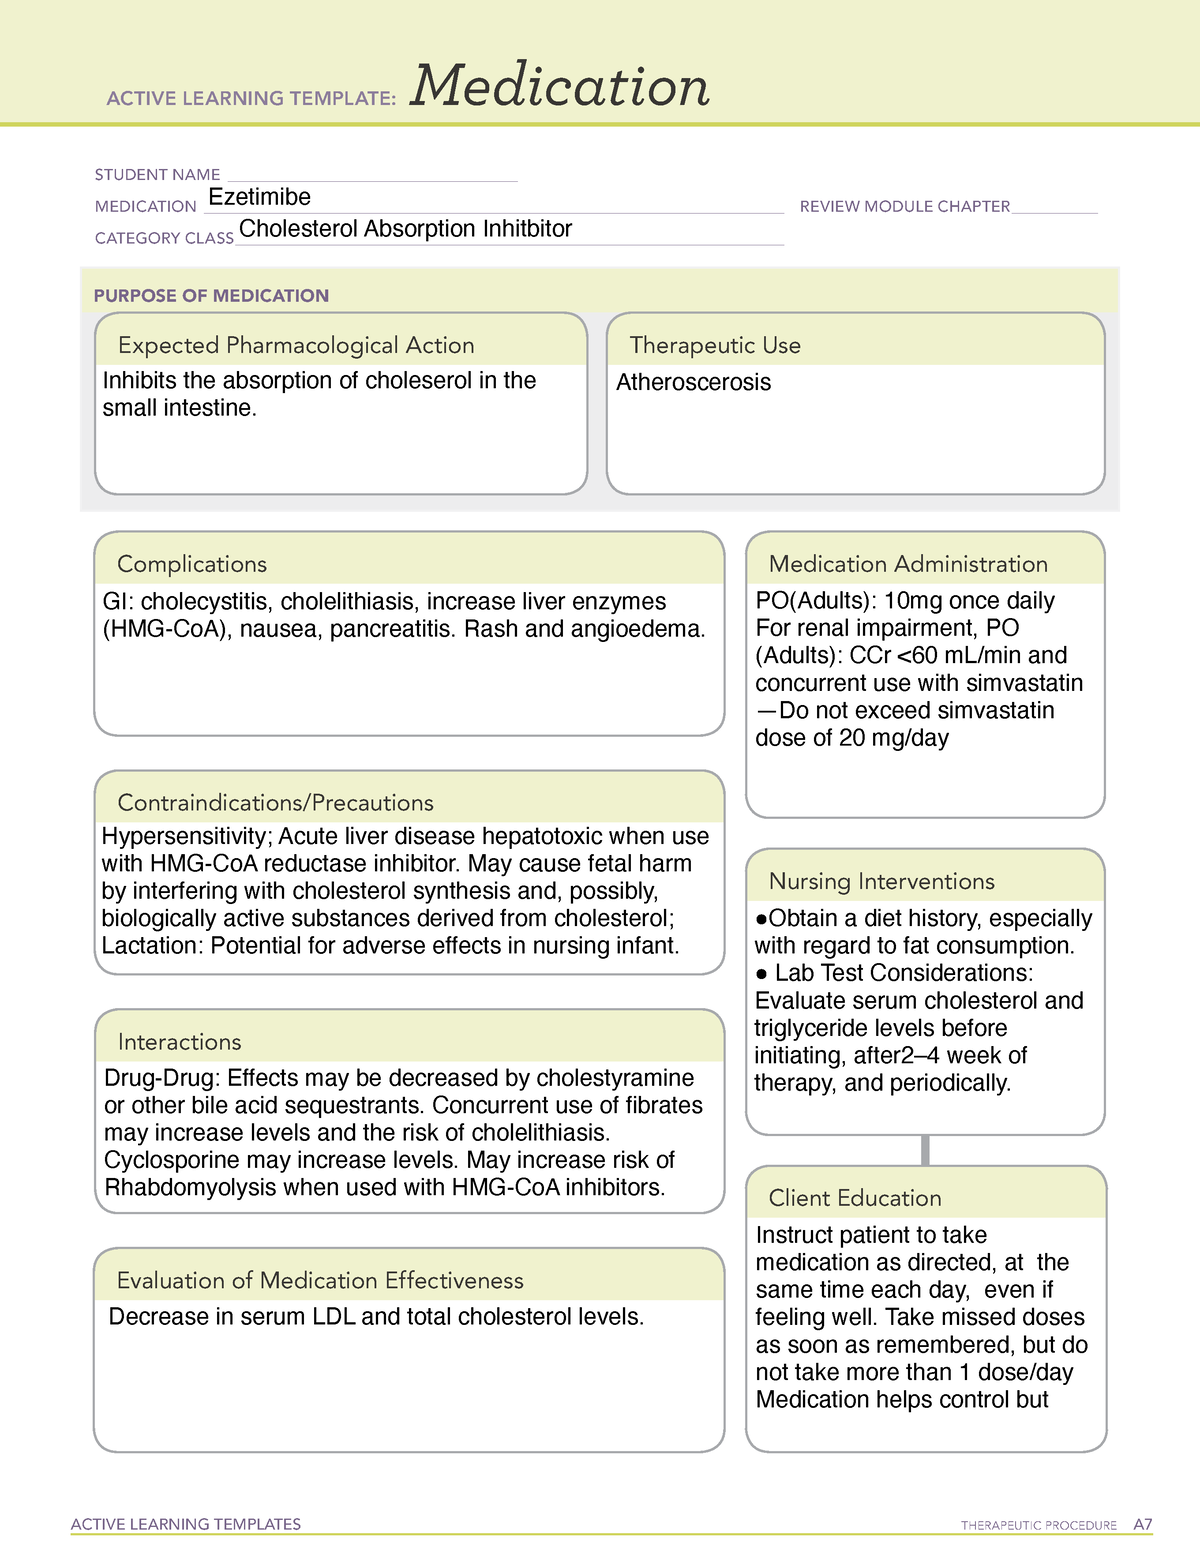 Ezetimibe Learning template ACTIVE LEARNING TEMPLATES THERAPEUTIC